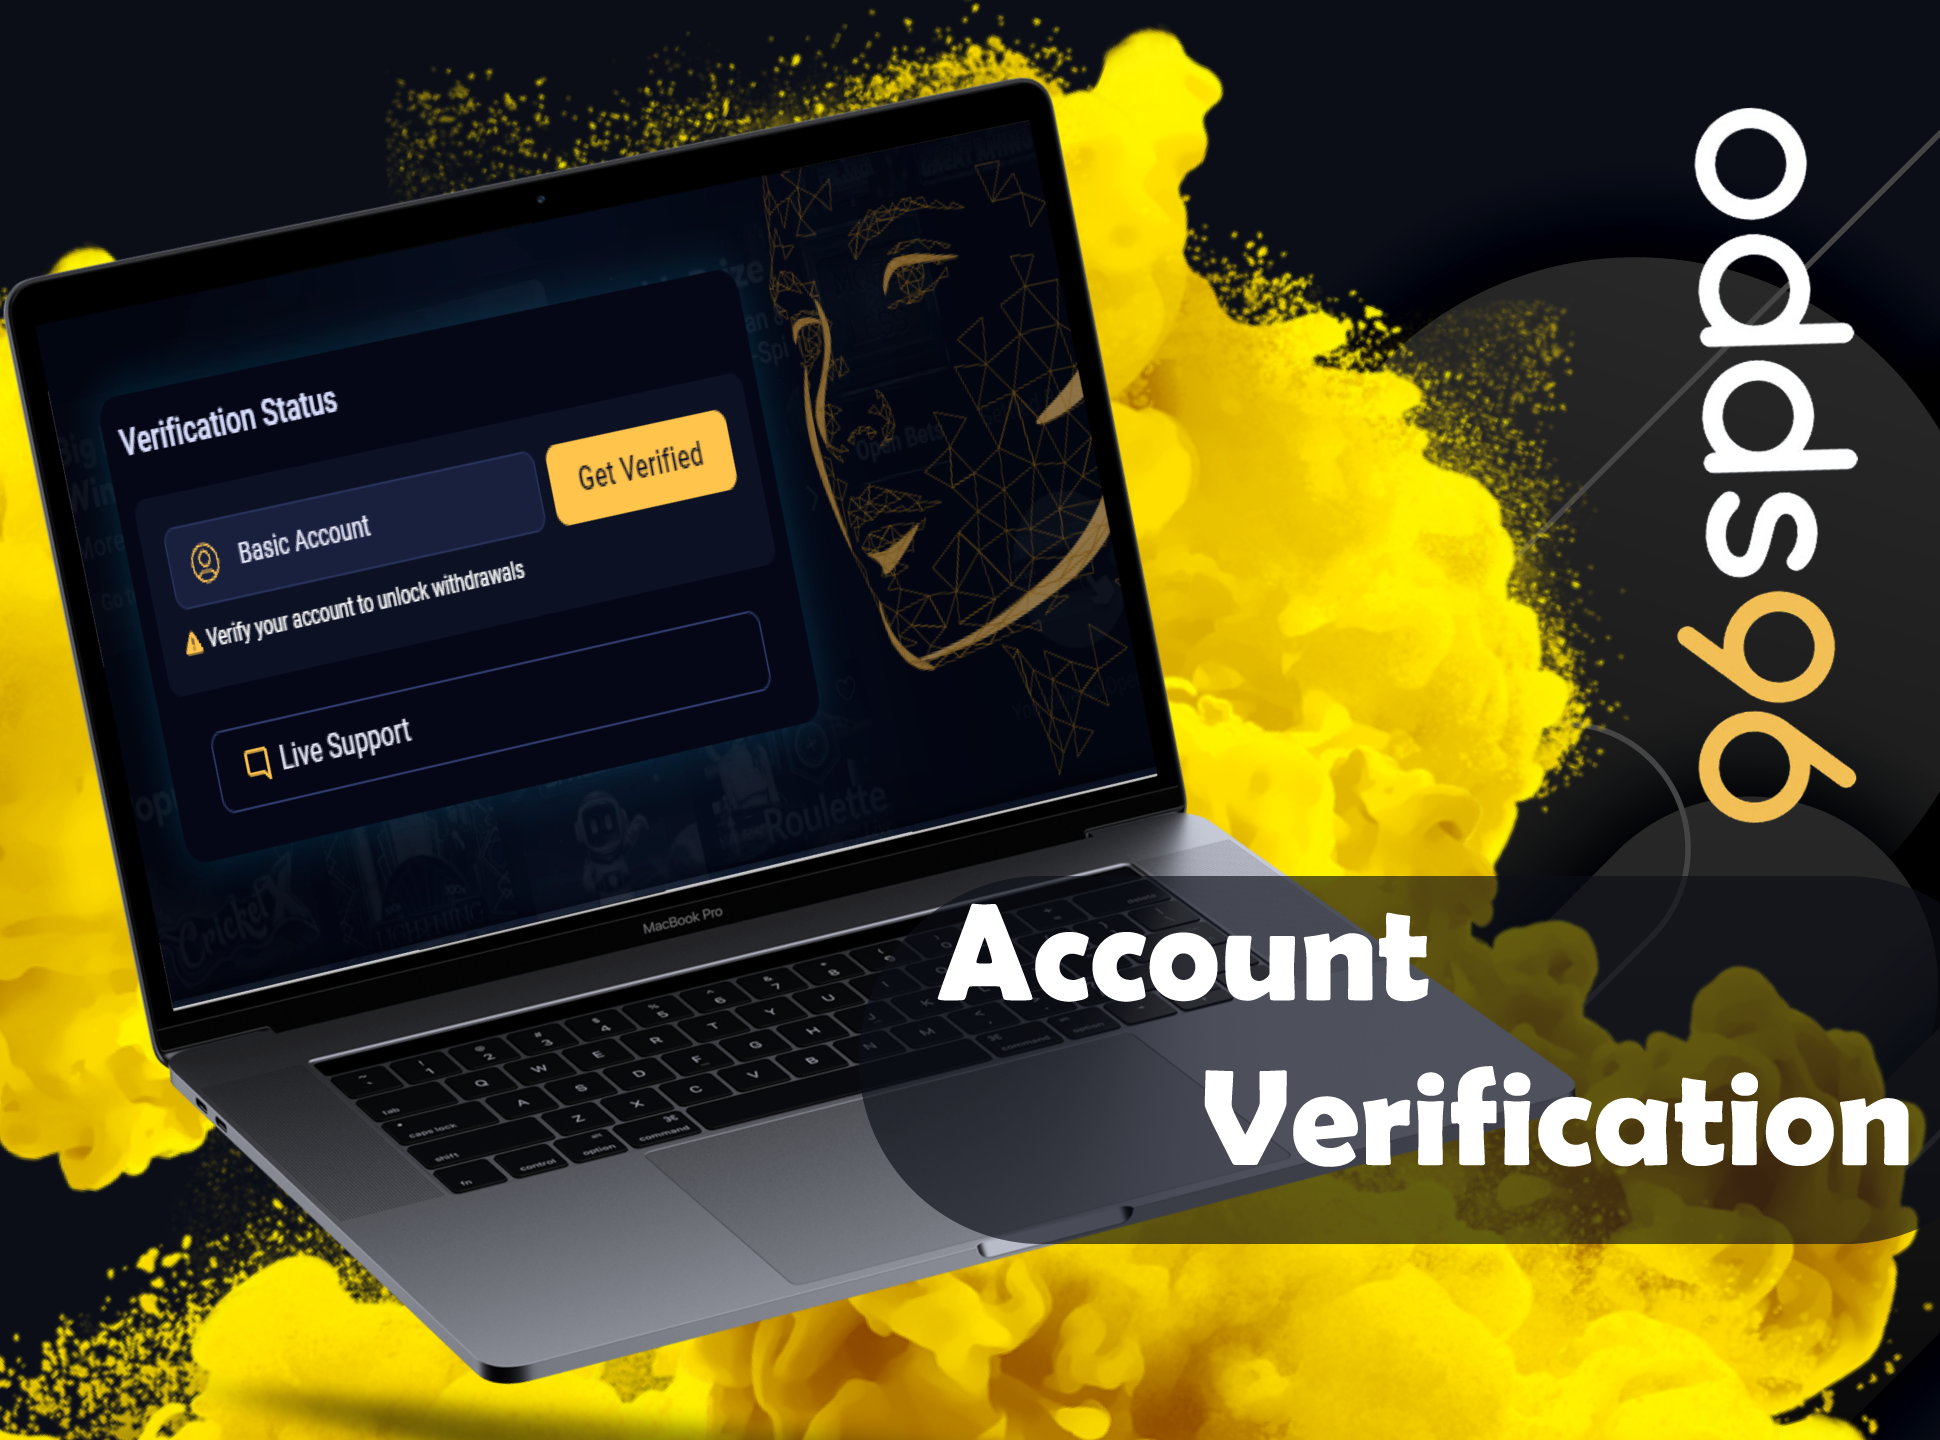 Verify your Odds96 account by providing required data.